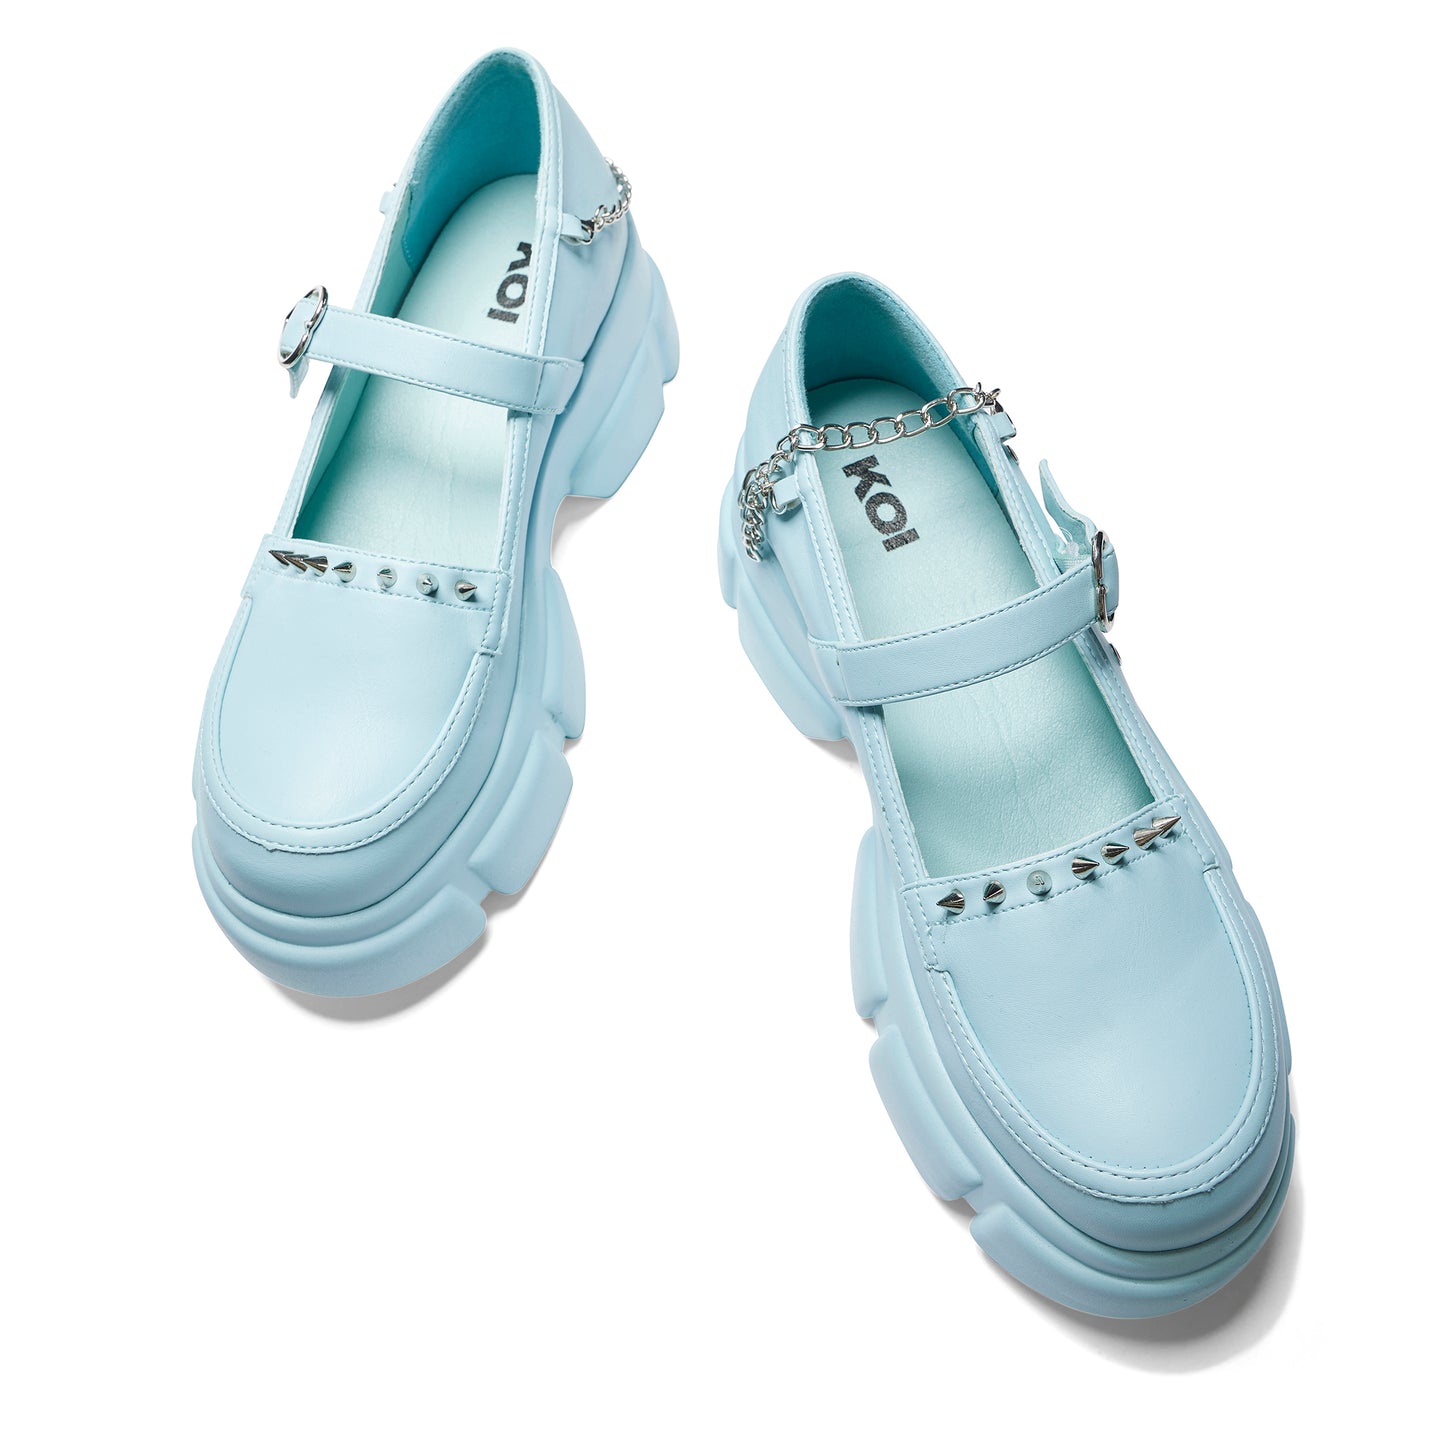 Cloud Mist Chunky Shoes - Baby Blue - Shoes - KOI Footwear - Blue - Top View